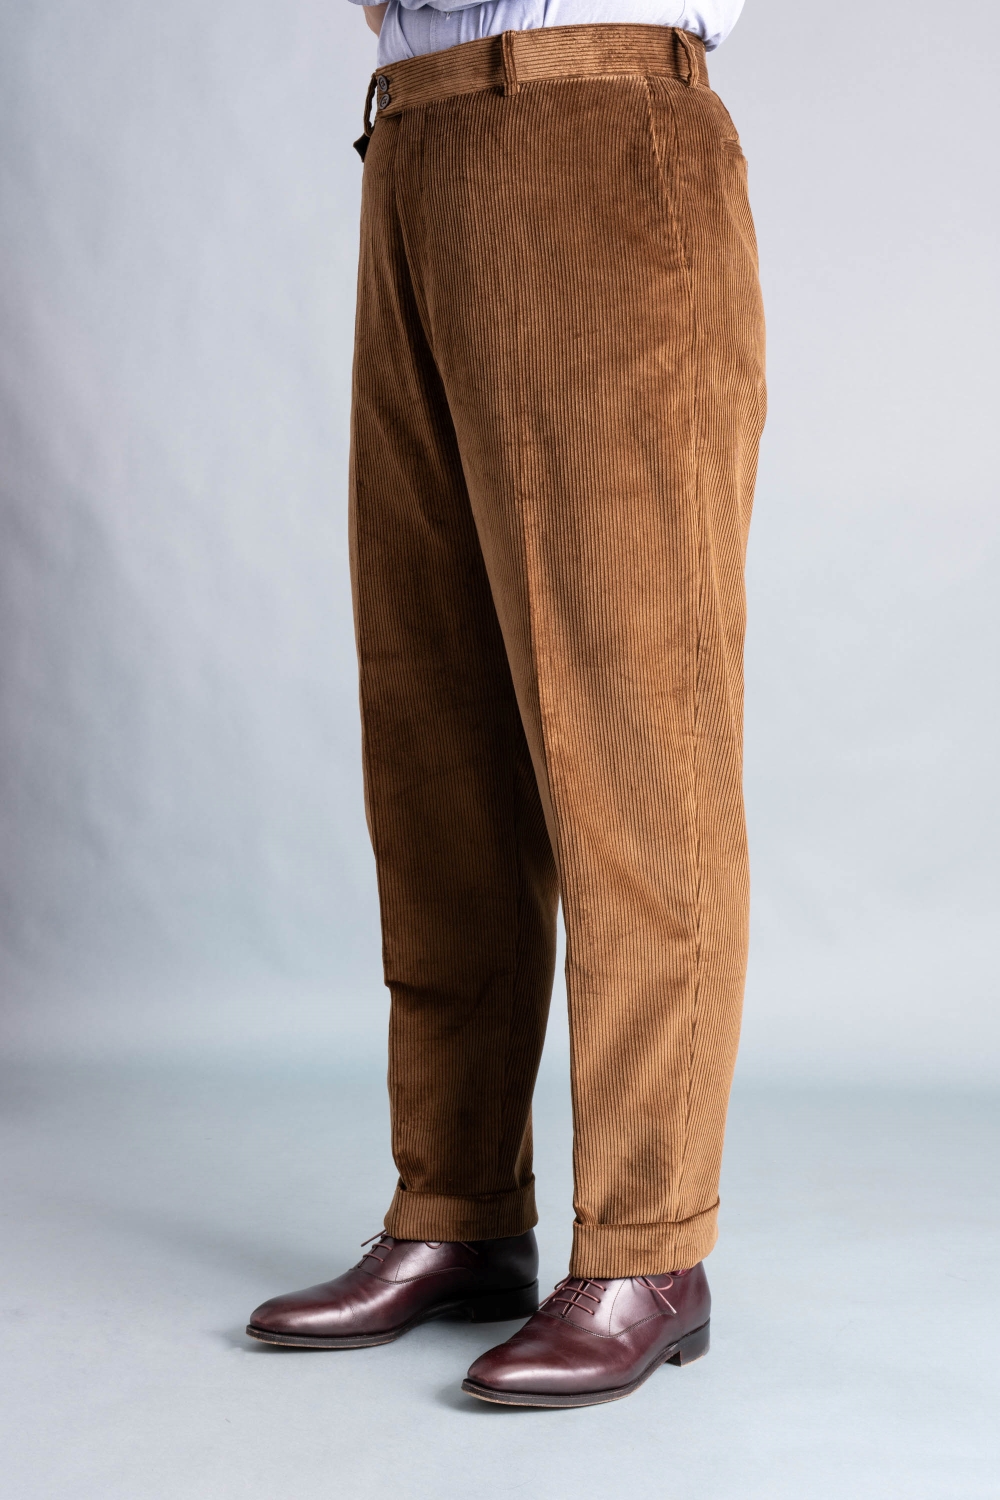 British Racing Green Corduroy Trousers - Stancliffe Flat-Front in